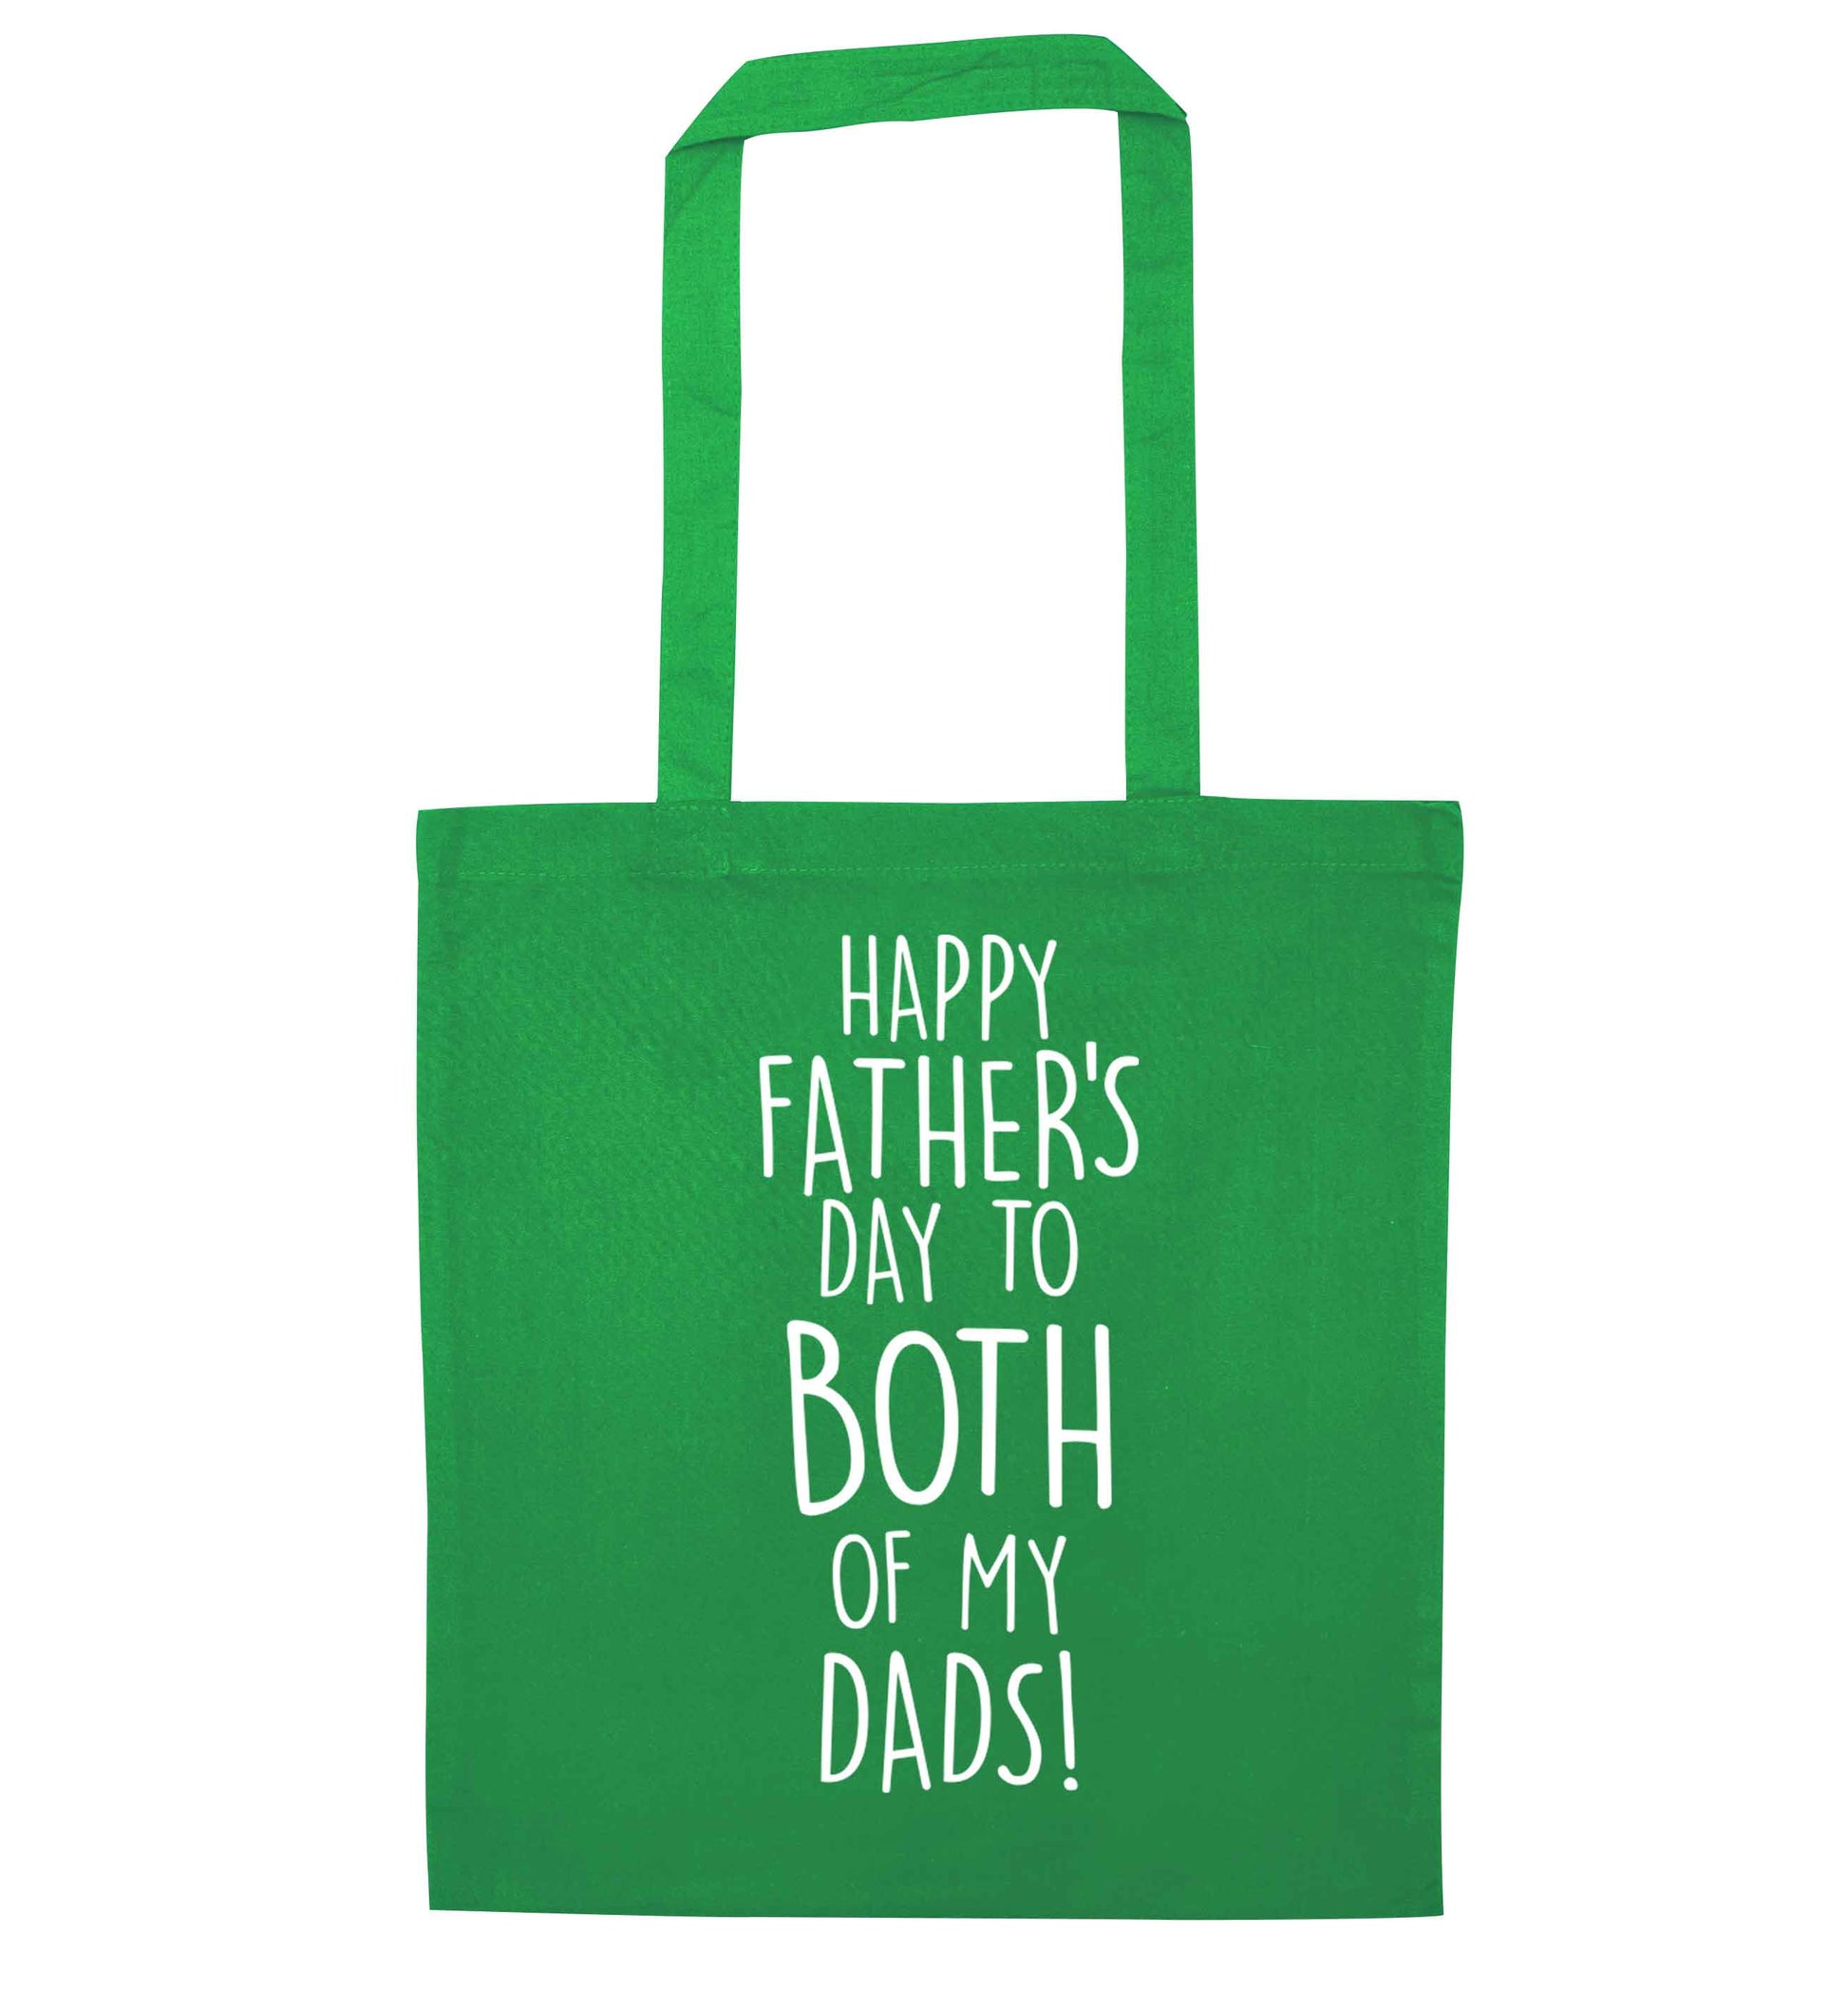 Happy Father's day to both of my dads green tote bag